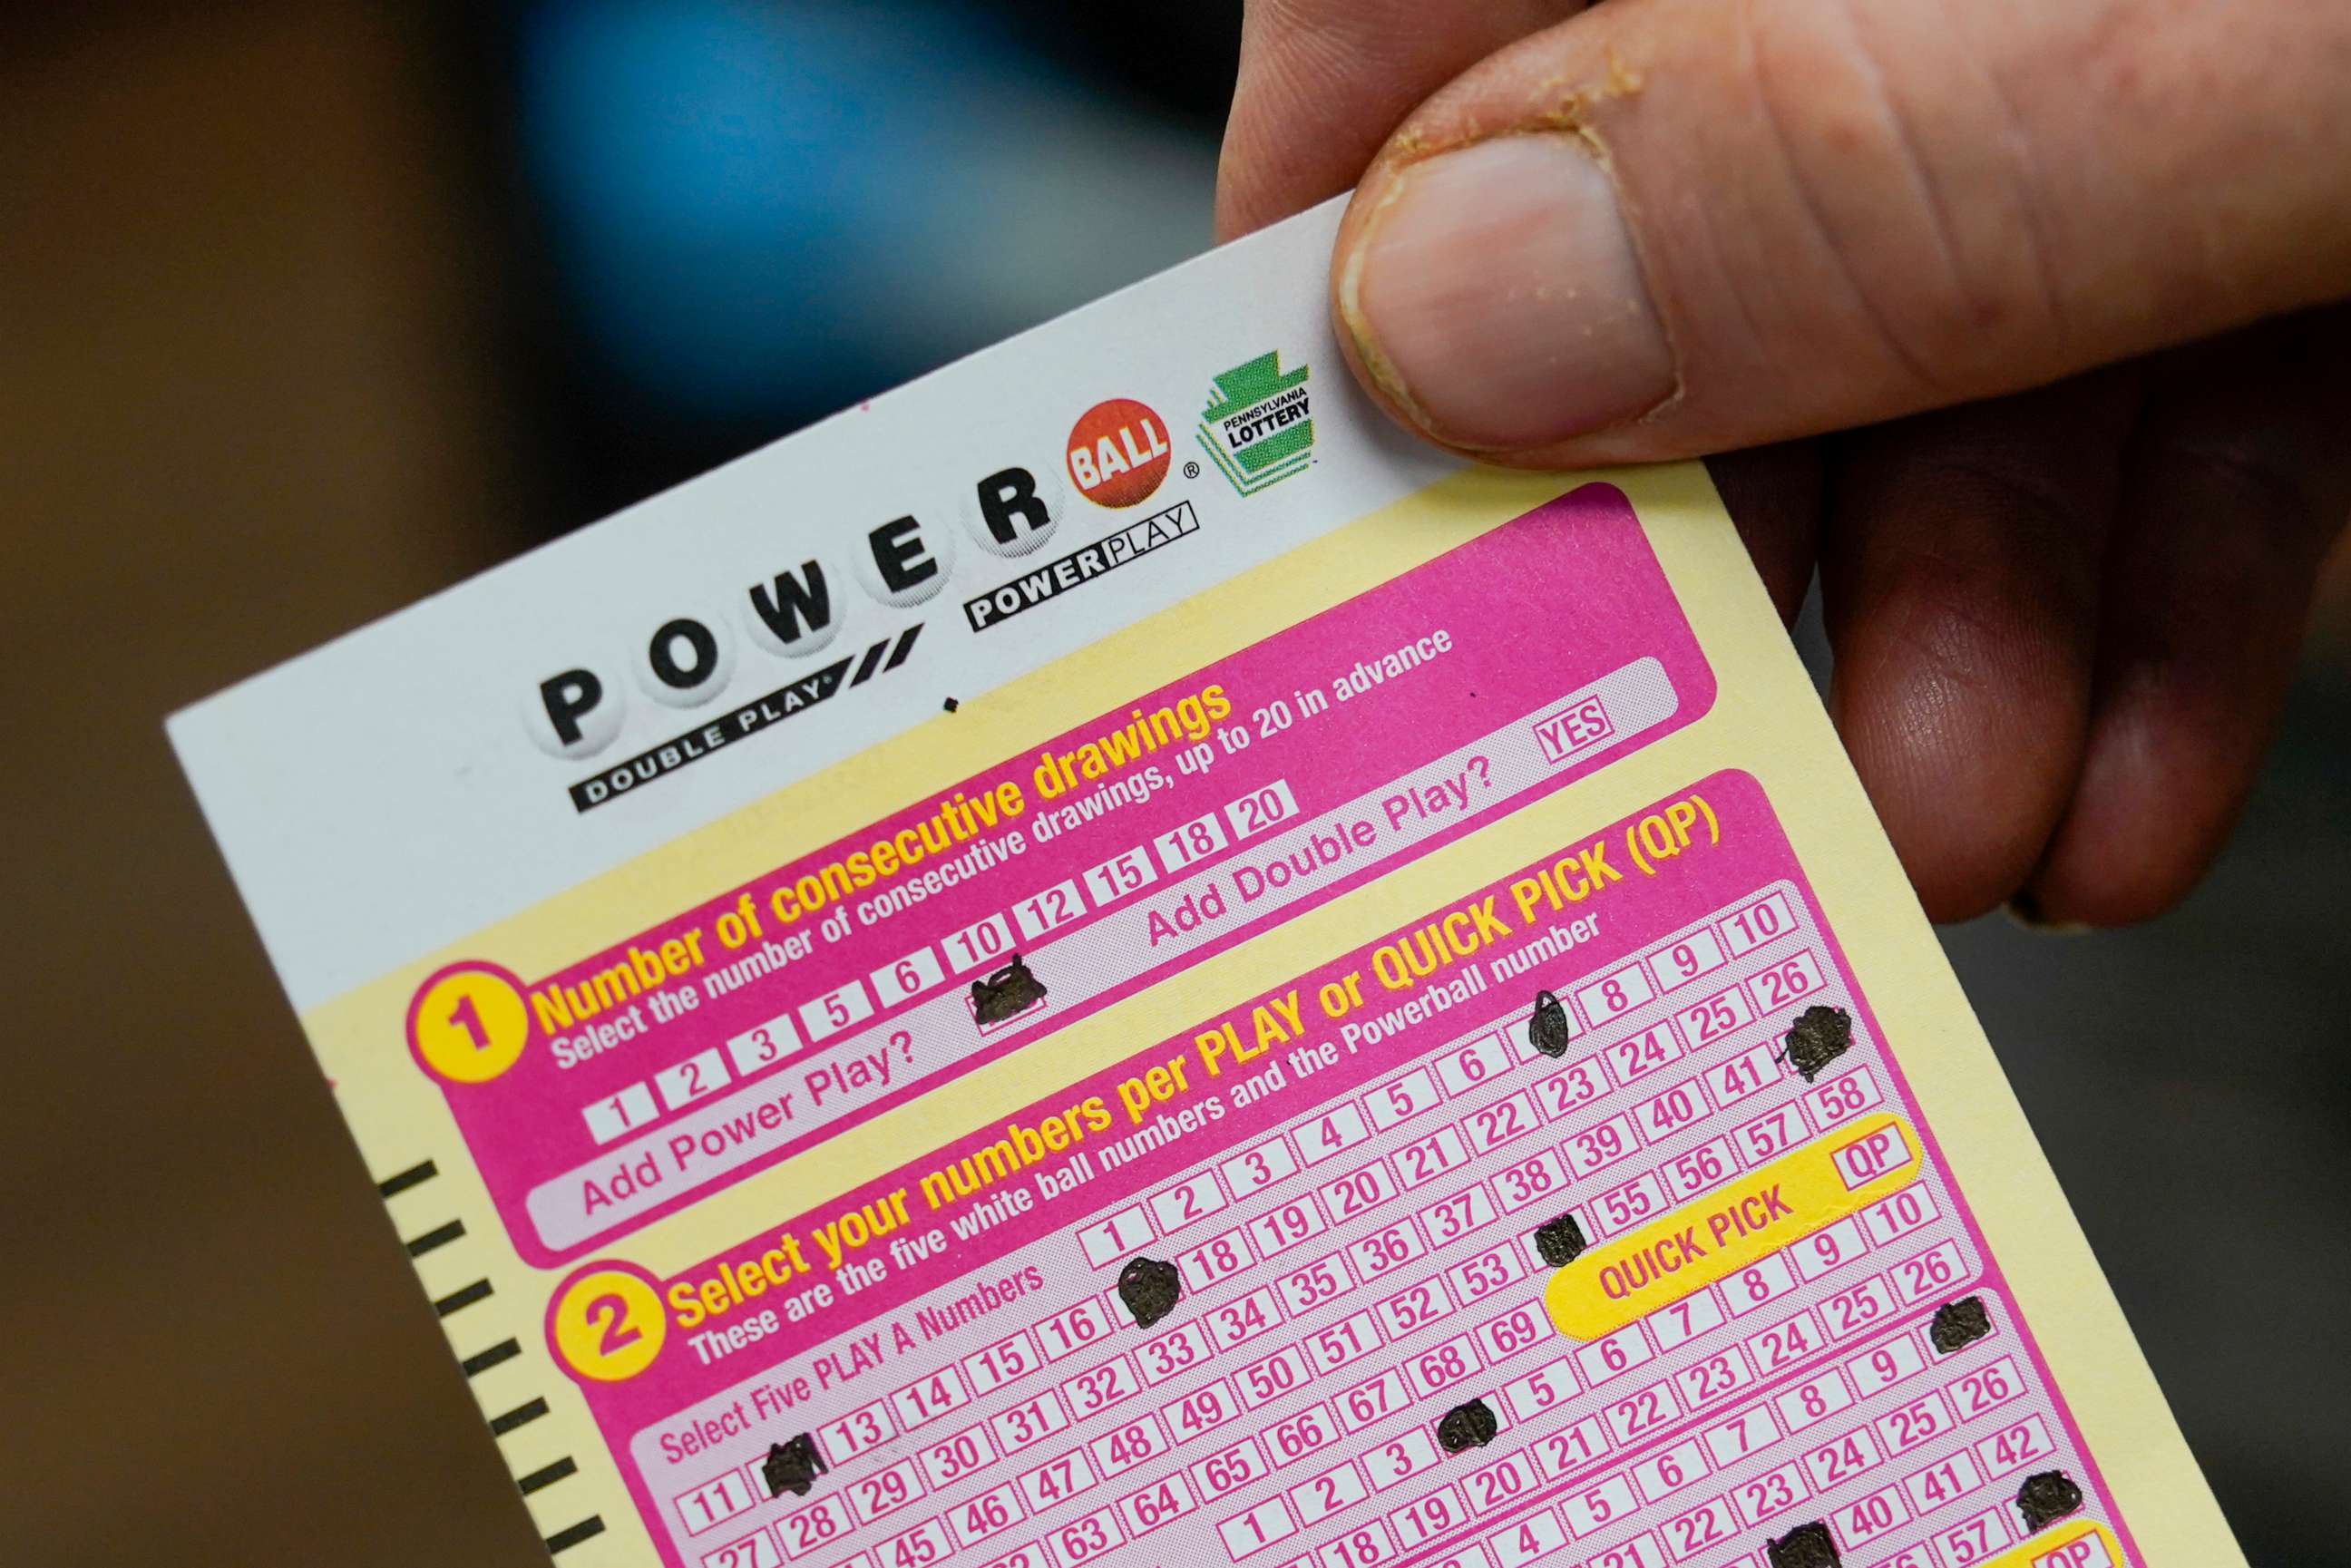 PHOTO: A customer shows his scan card for his personal selection numbers for a ticket for a Monday Powerball drawing on Nov. 7, 2022, at a convenience store in Renfrew, Pa.